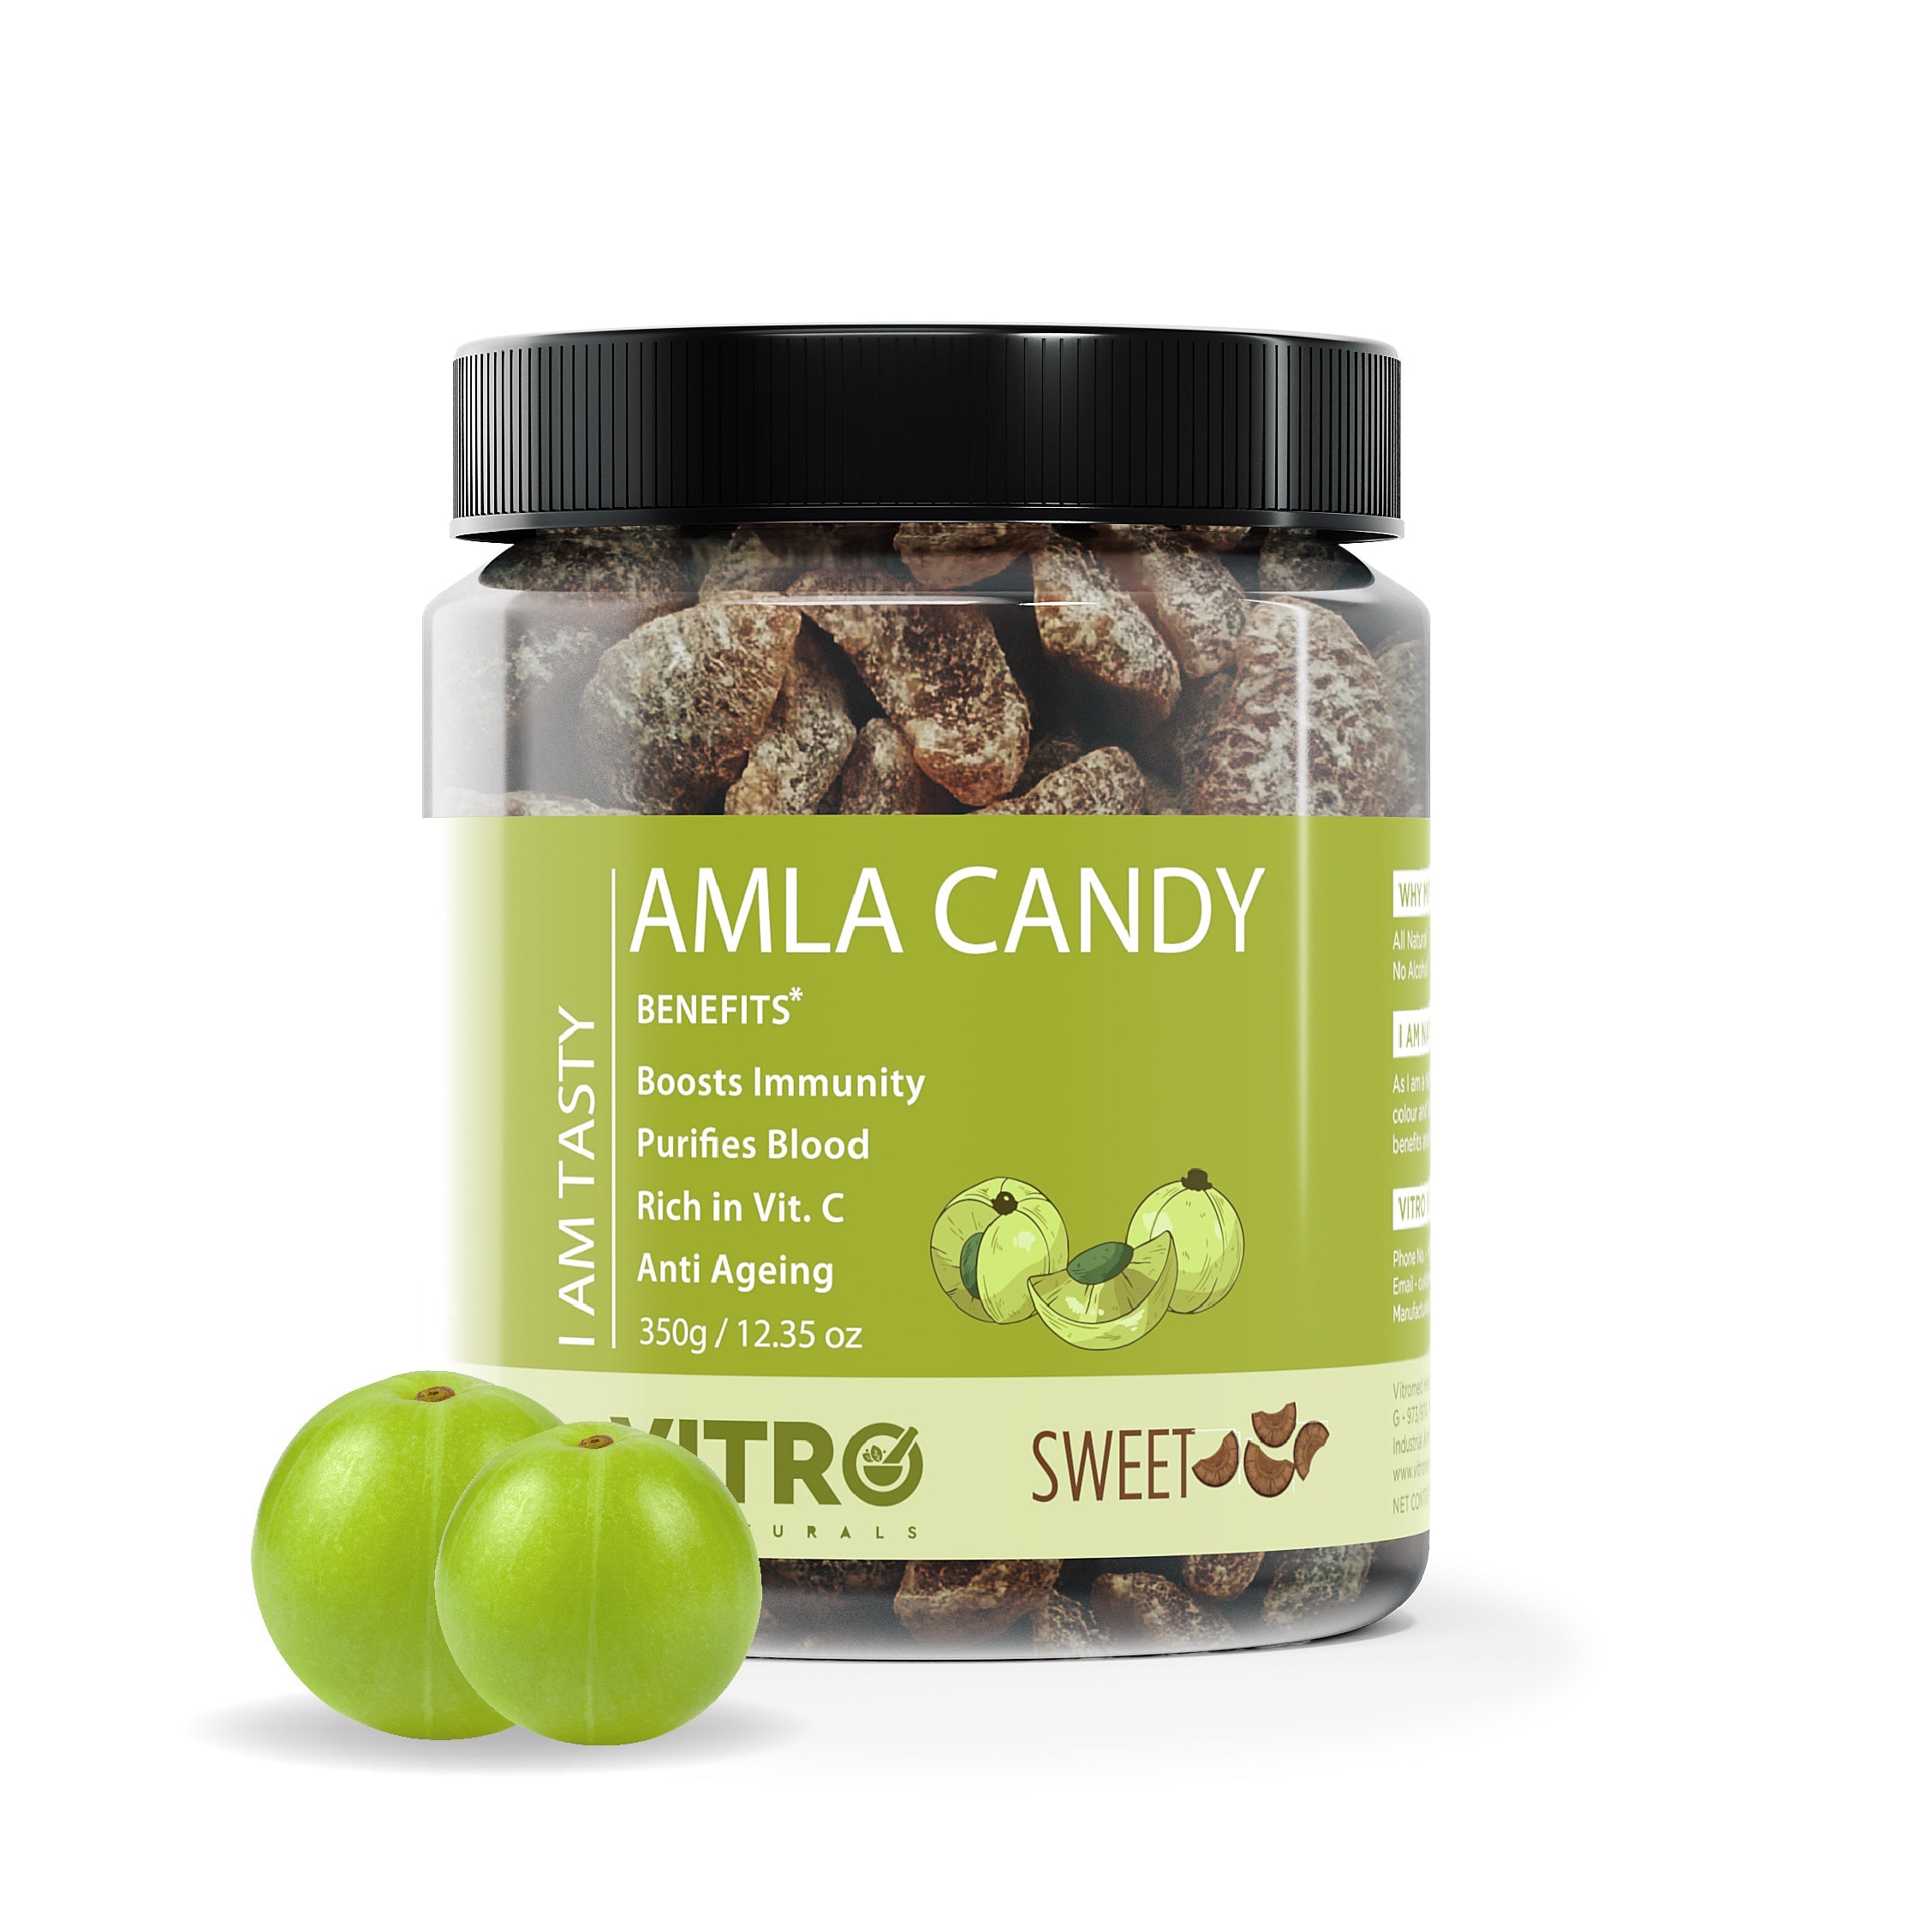 Only at ₹ 1 -  Amla Candy Sweet, Dry & Soft Candy 350gm